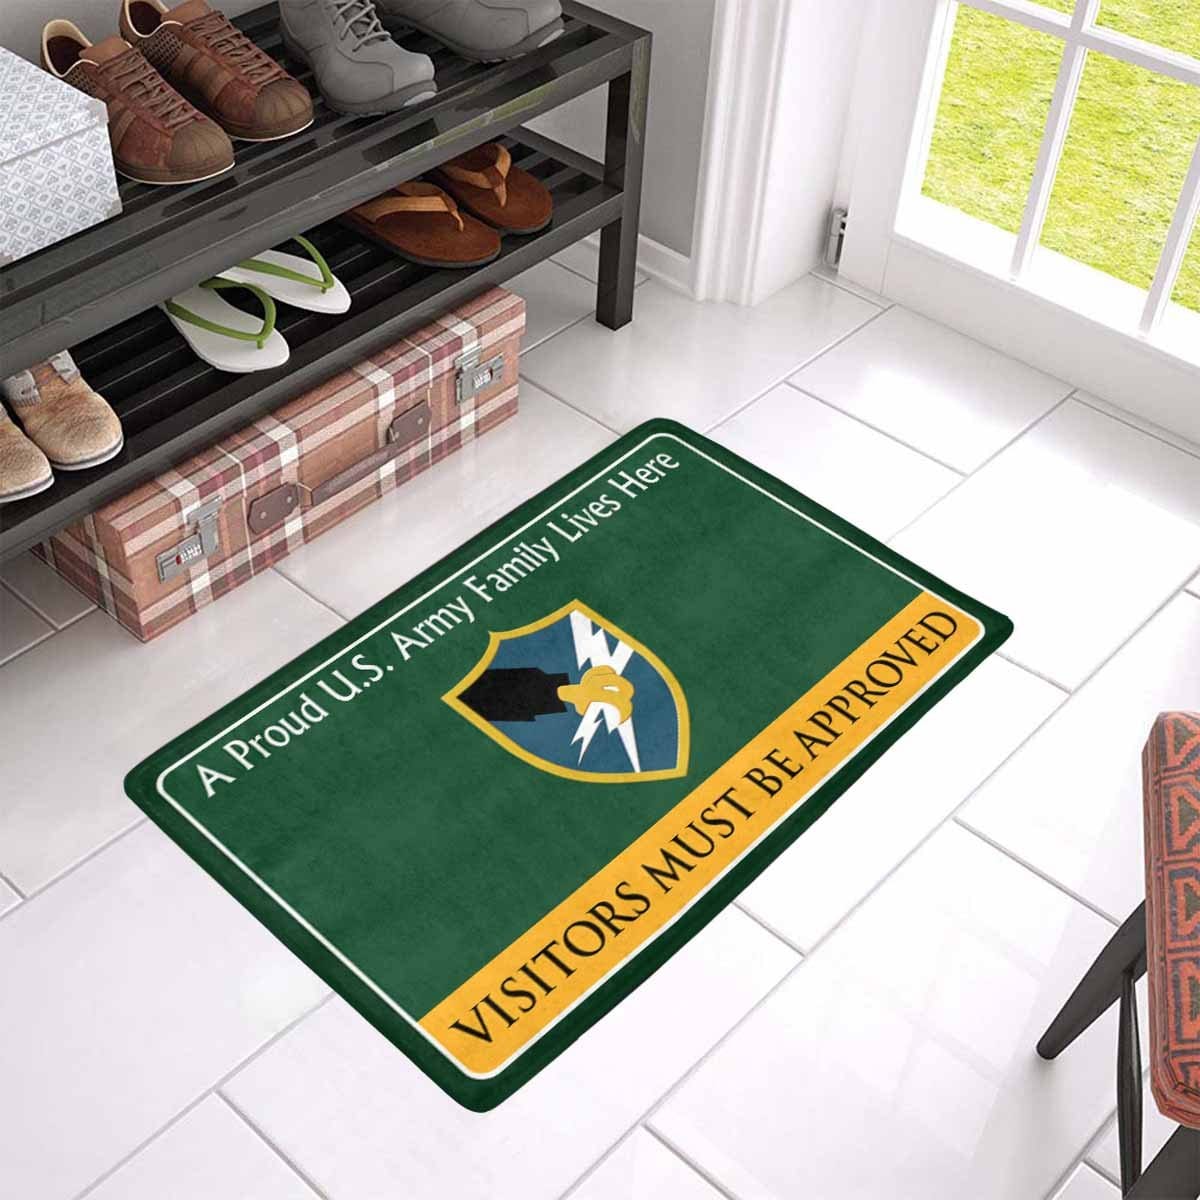 US Army Security Agency Family Doormat - Visitors must be approved Doormat (23.6 inches x 15.7 inches)-Doormat-Army-Branch-Veterans Nation